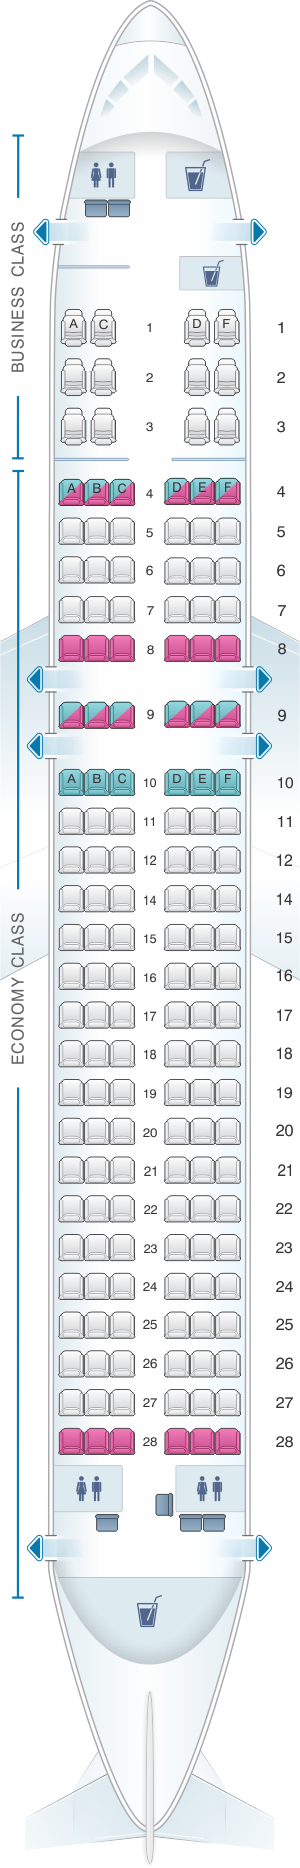 Seat Map Philippine Airlines Airbus A320 200 V2 | SeatMaestro